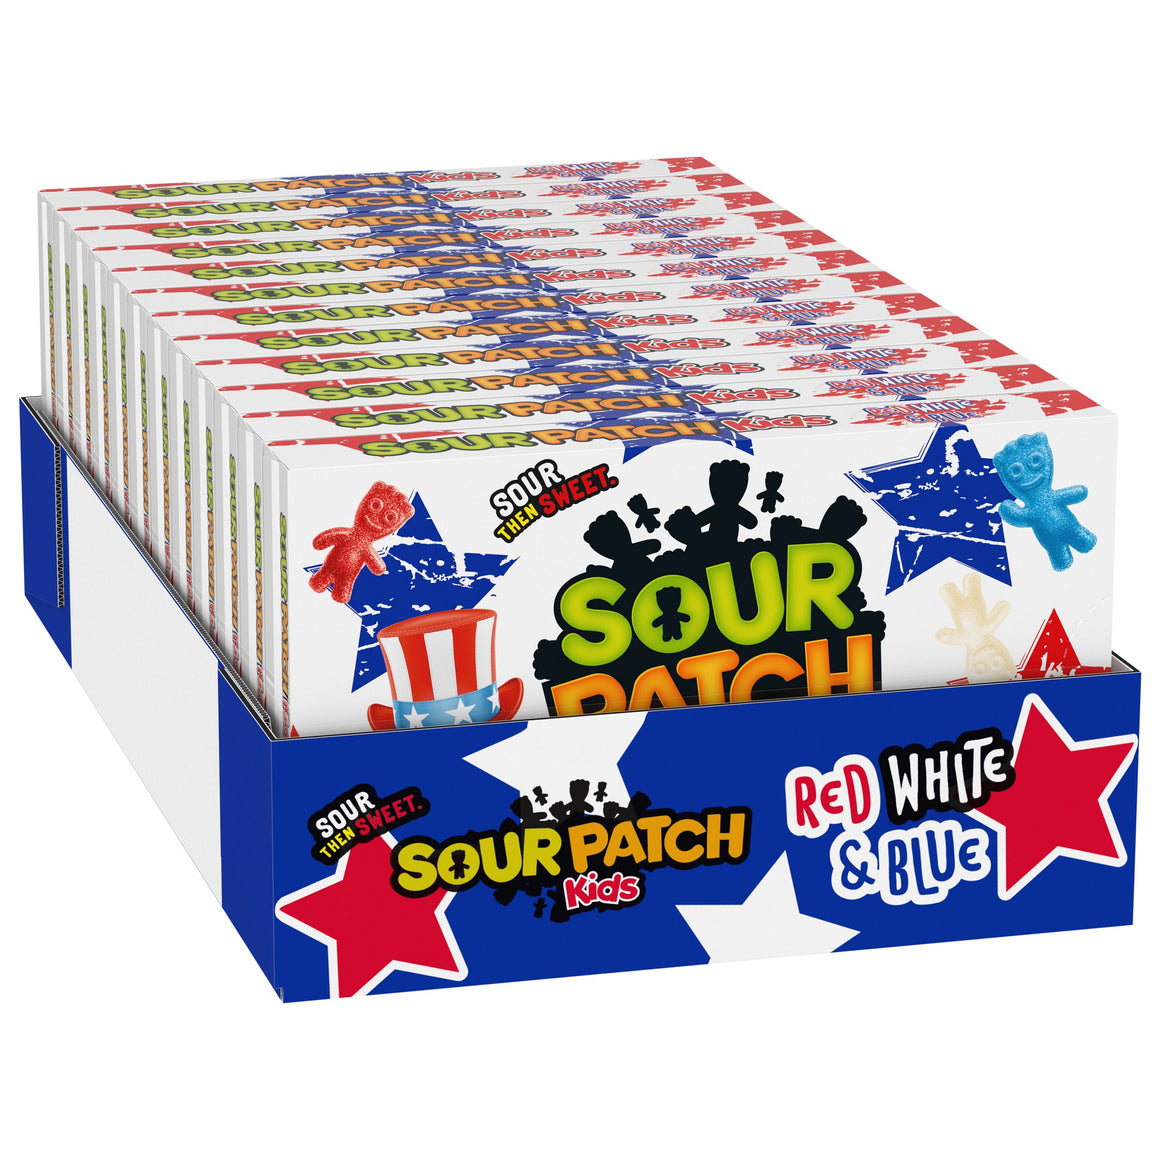 Sour Patch Kids Red White and Blue Theater Box - For fresh candy and great service, visit www.allcitycandy.com